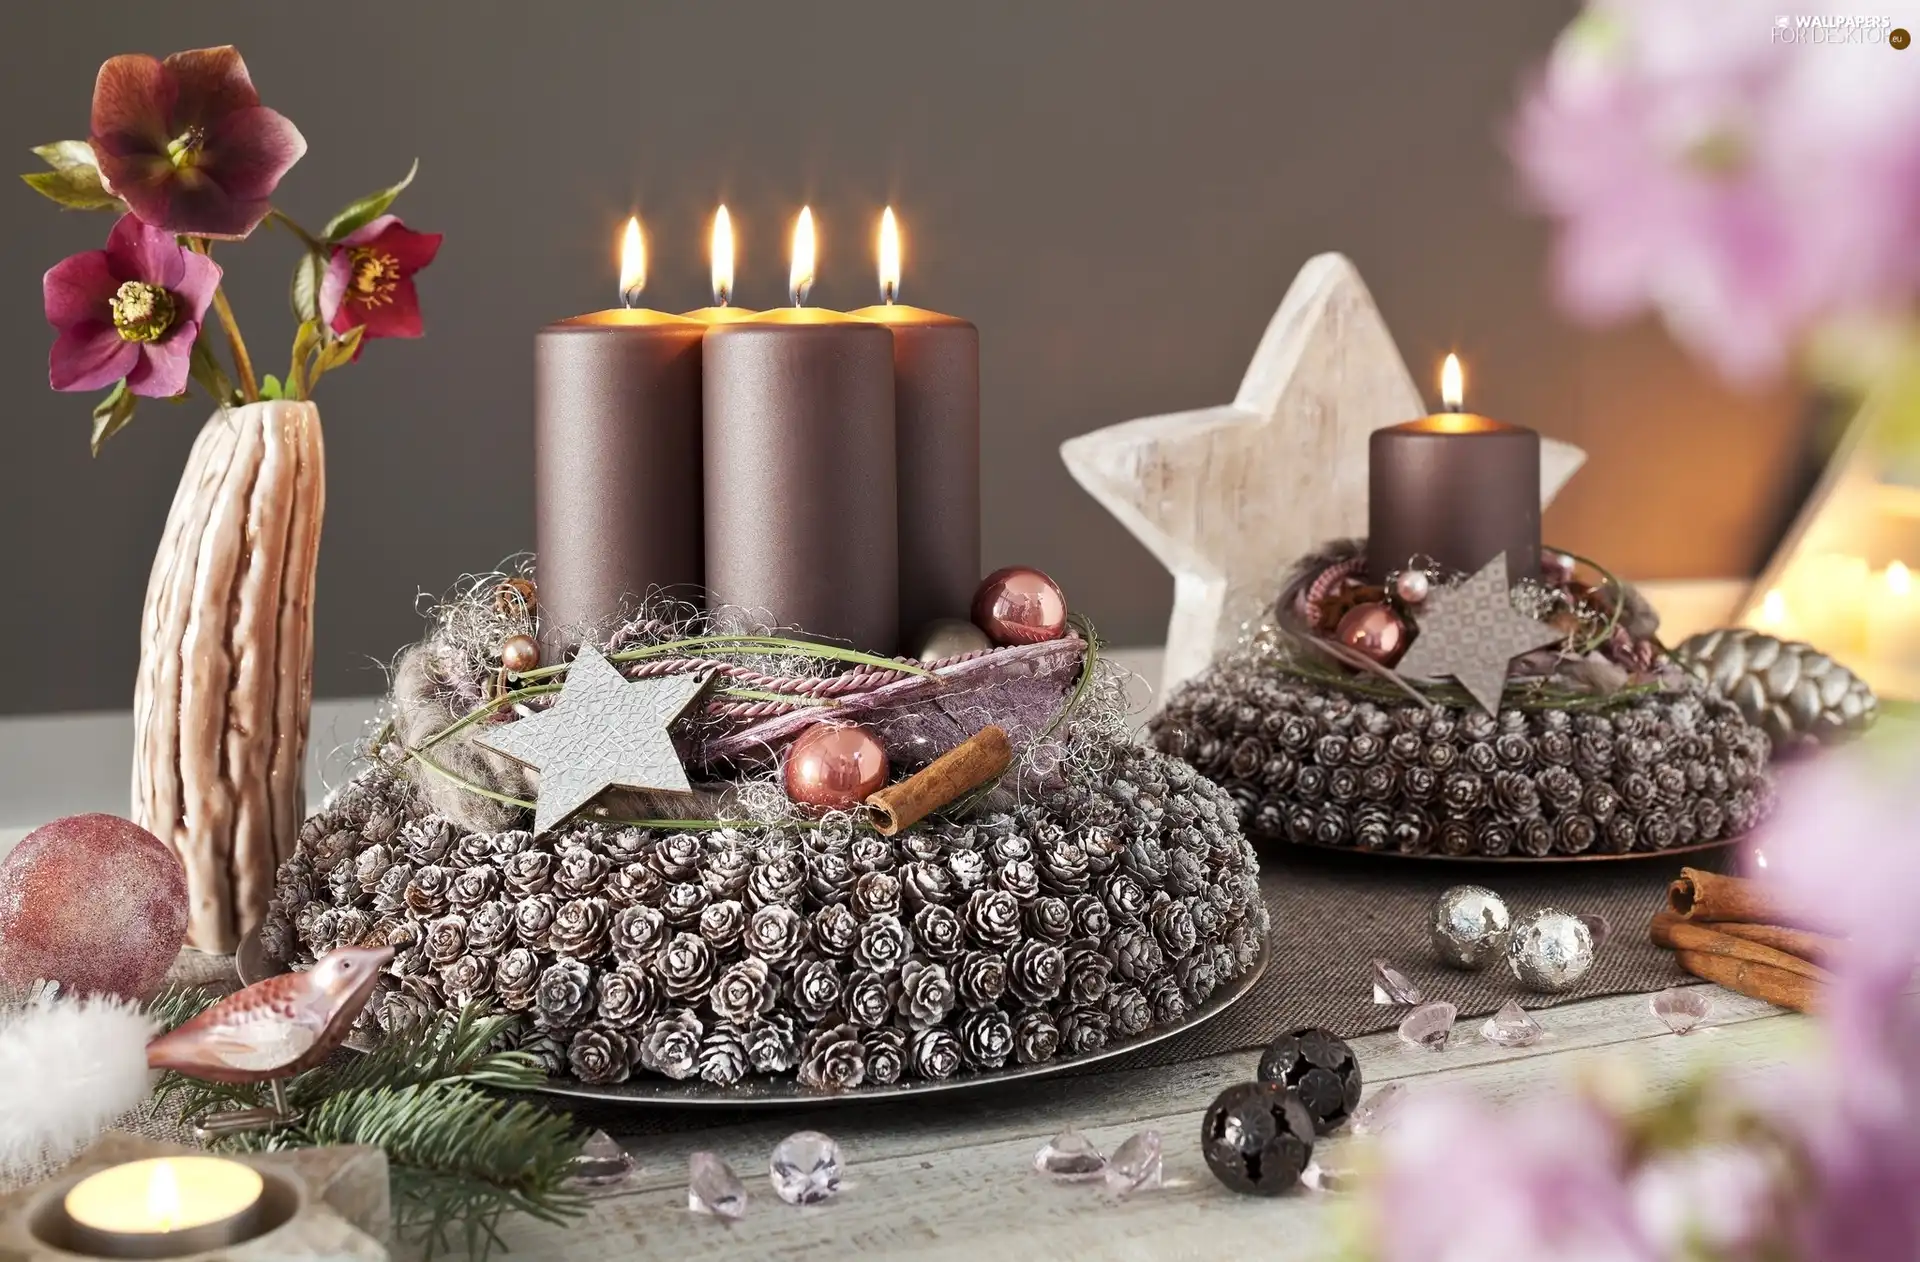 Wreaths, Flowers, composition, candle, Christmas